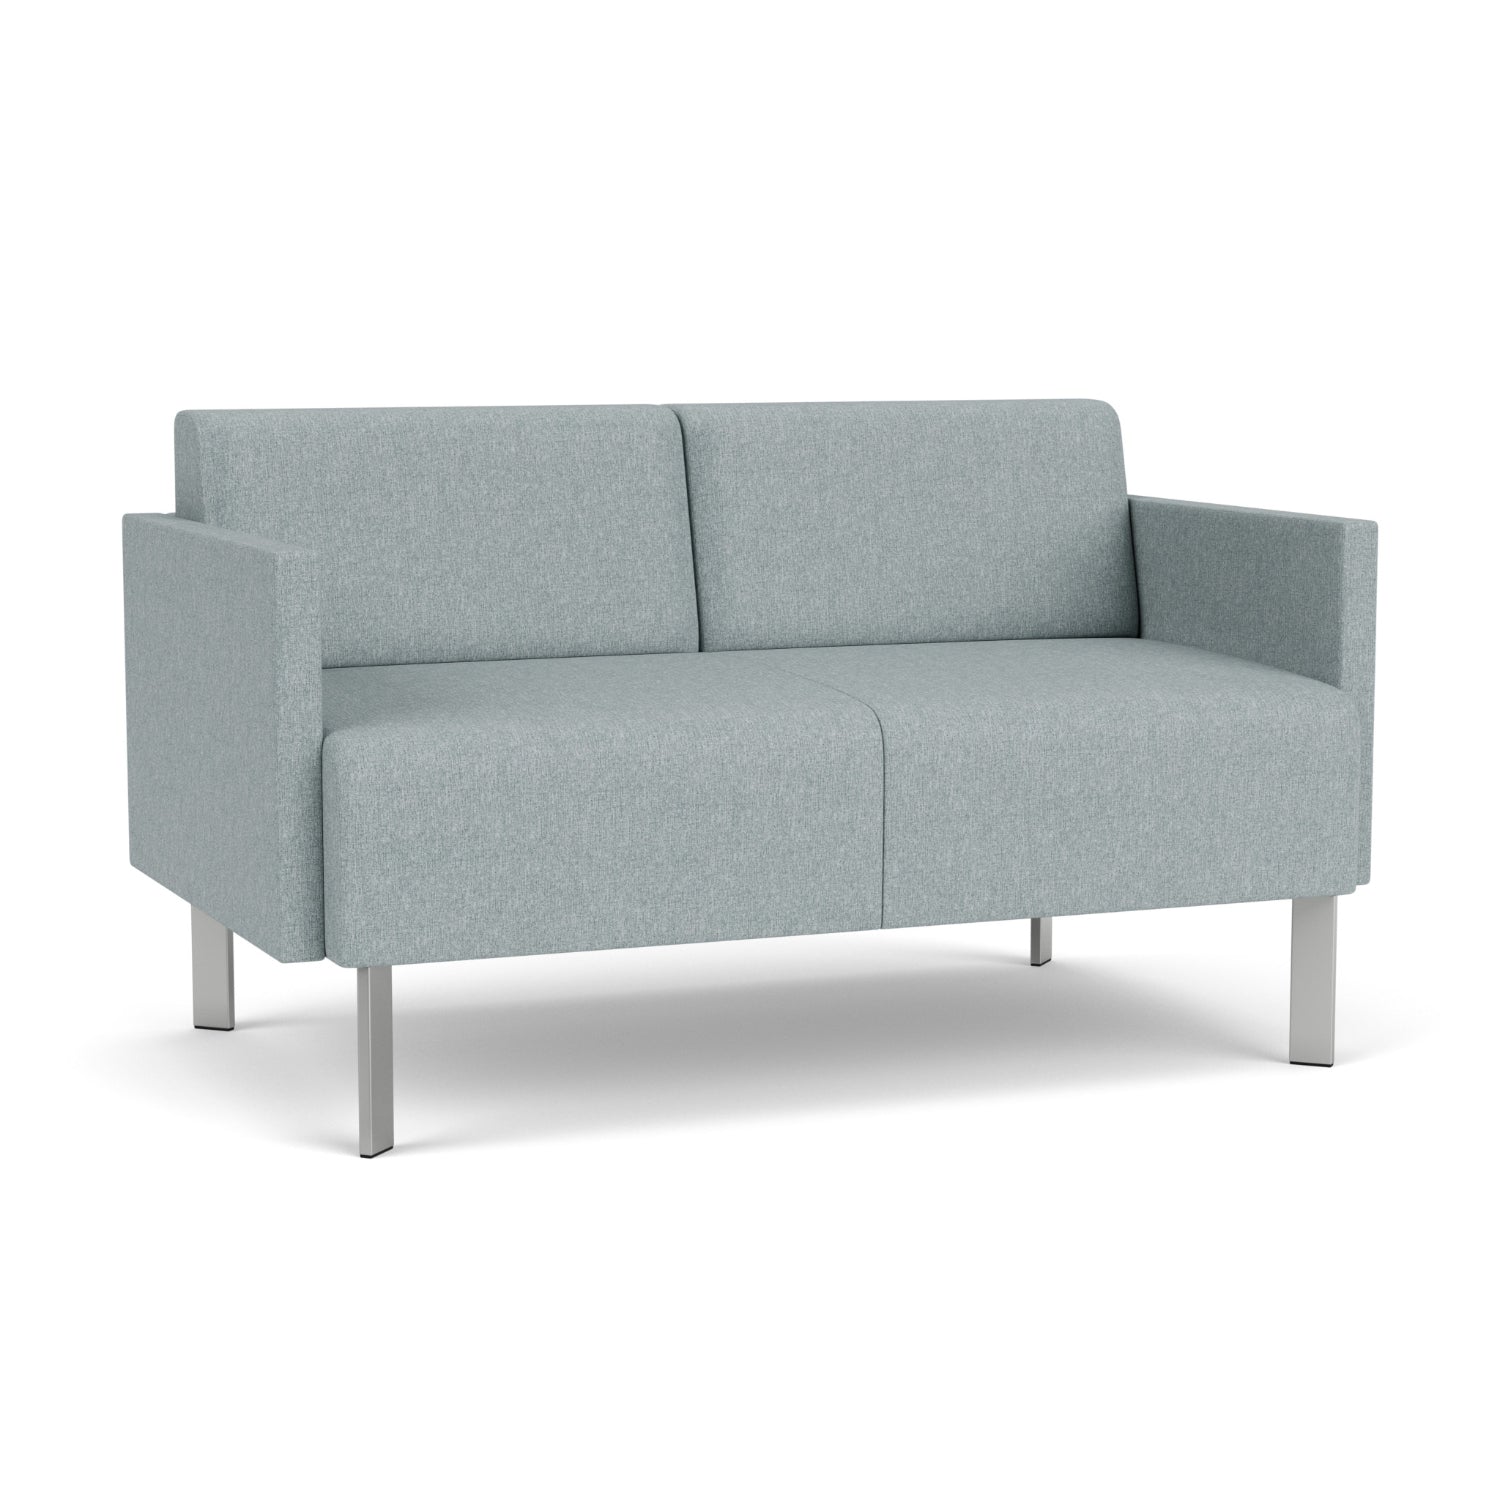 Luxe Collection Reception Seating, Loveseat, Healthcare Vinyl Upholstery, FREE SHIPPING